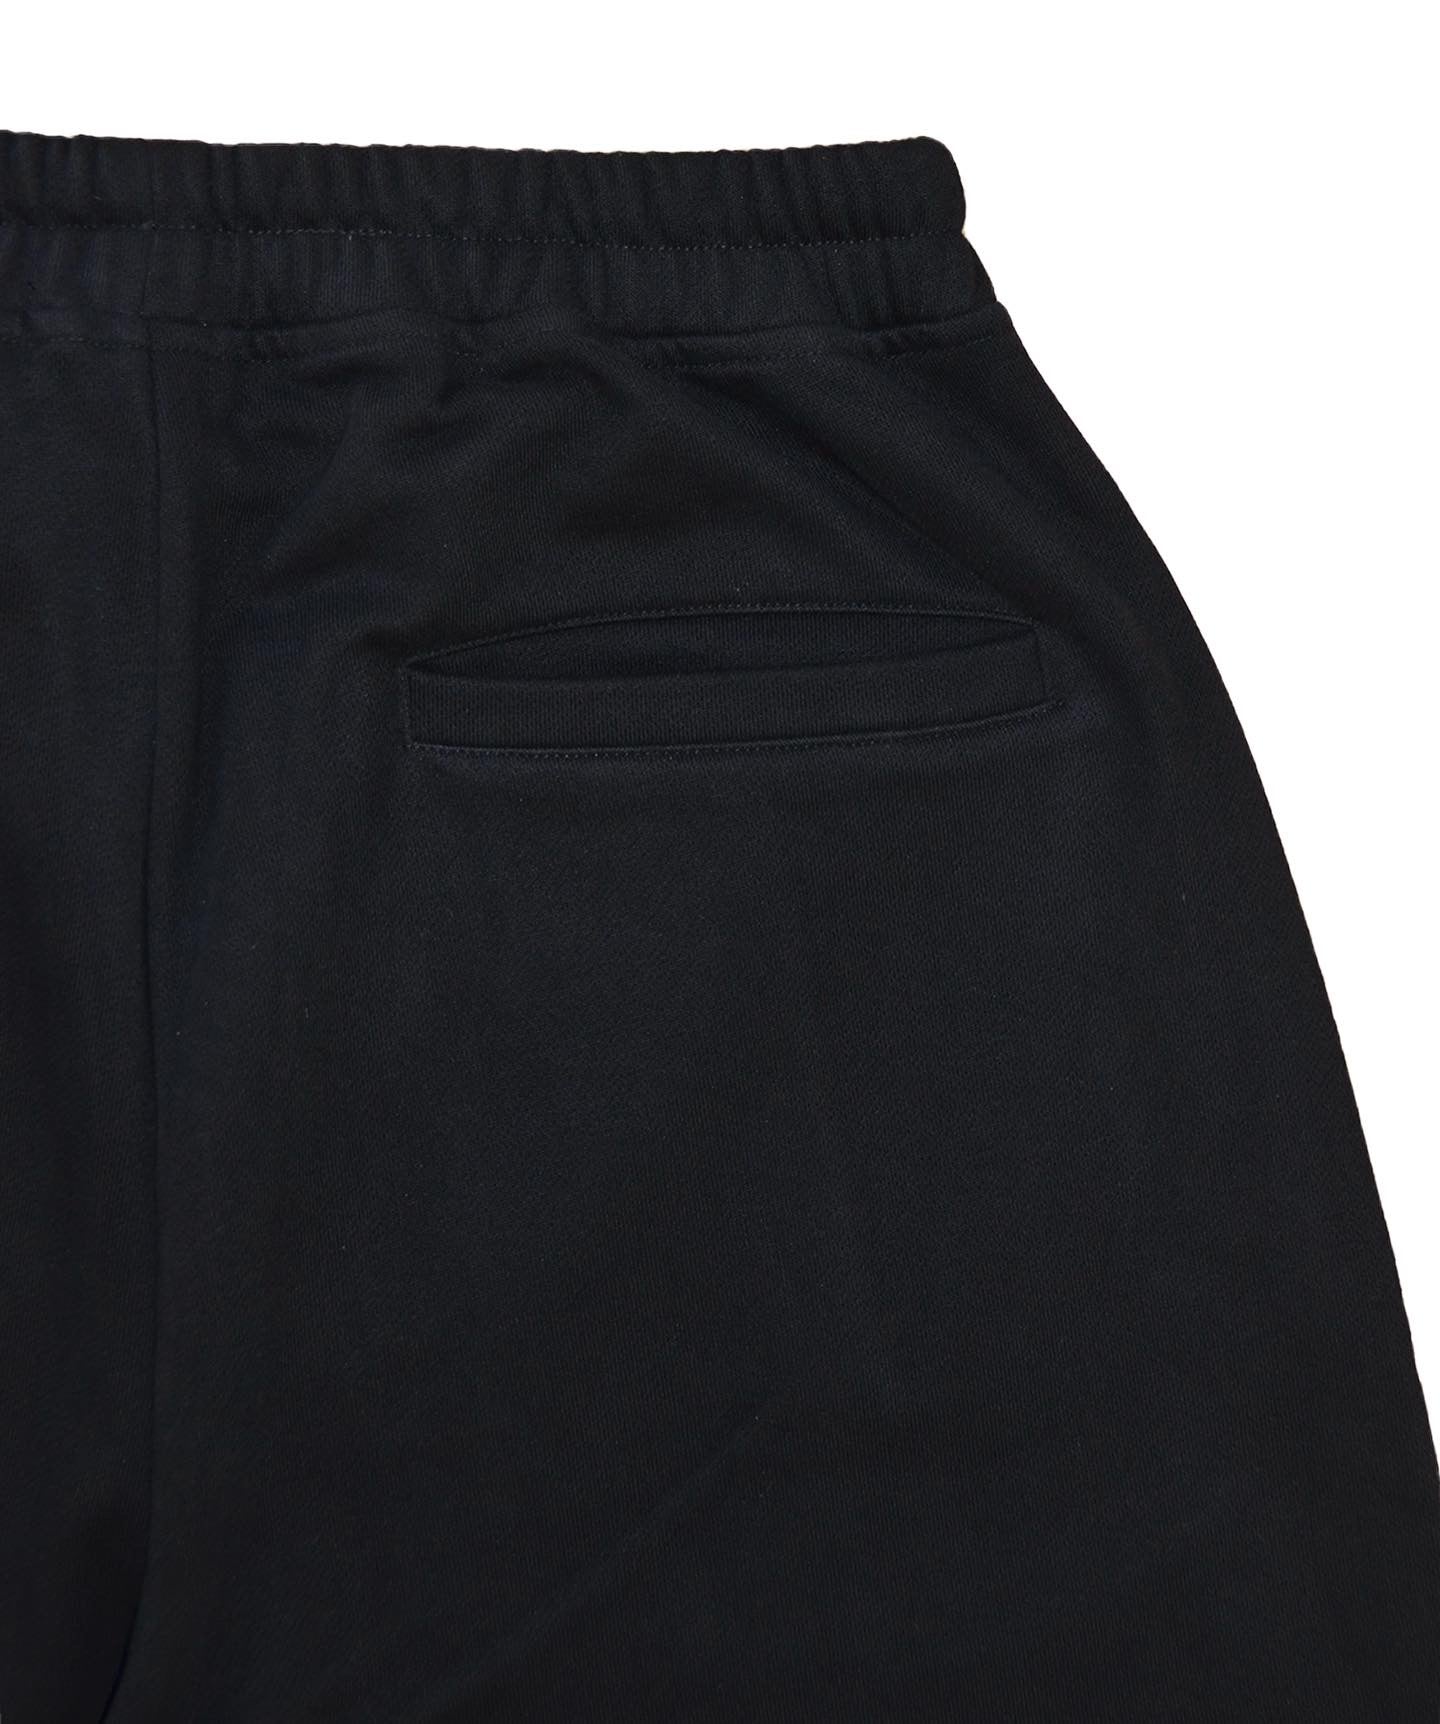 BLACK OVER-DYED BAGGY SWEATPANTS (PRE ORDER)